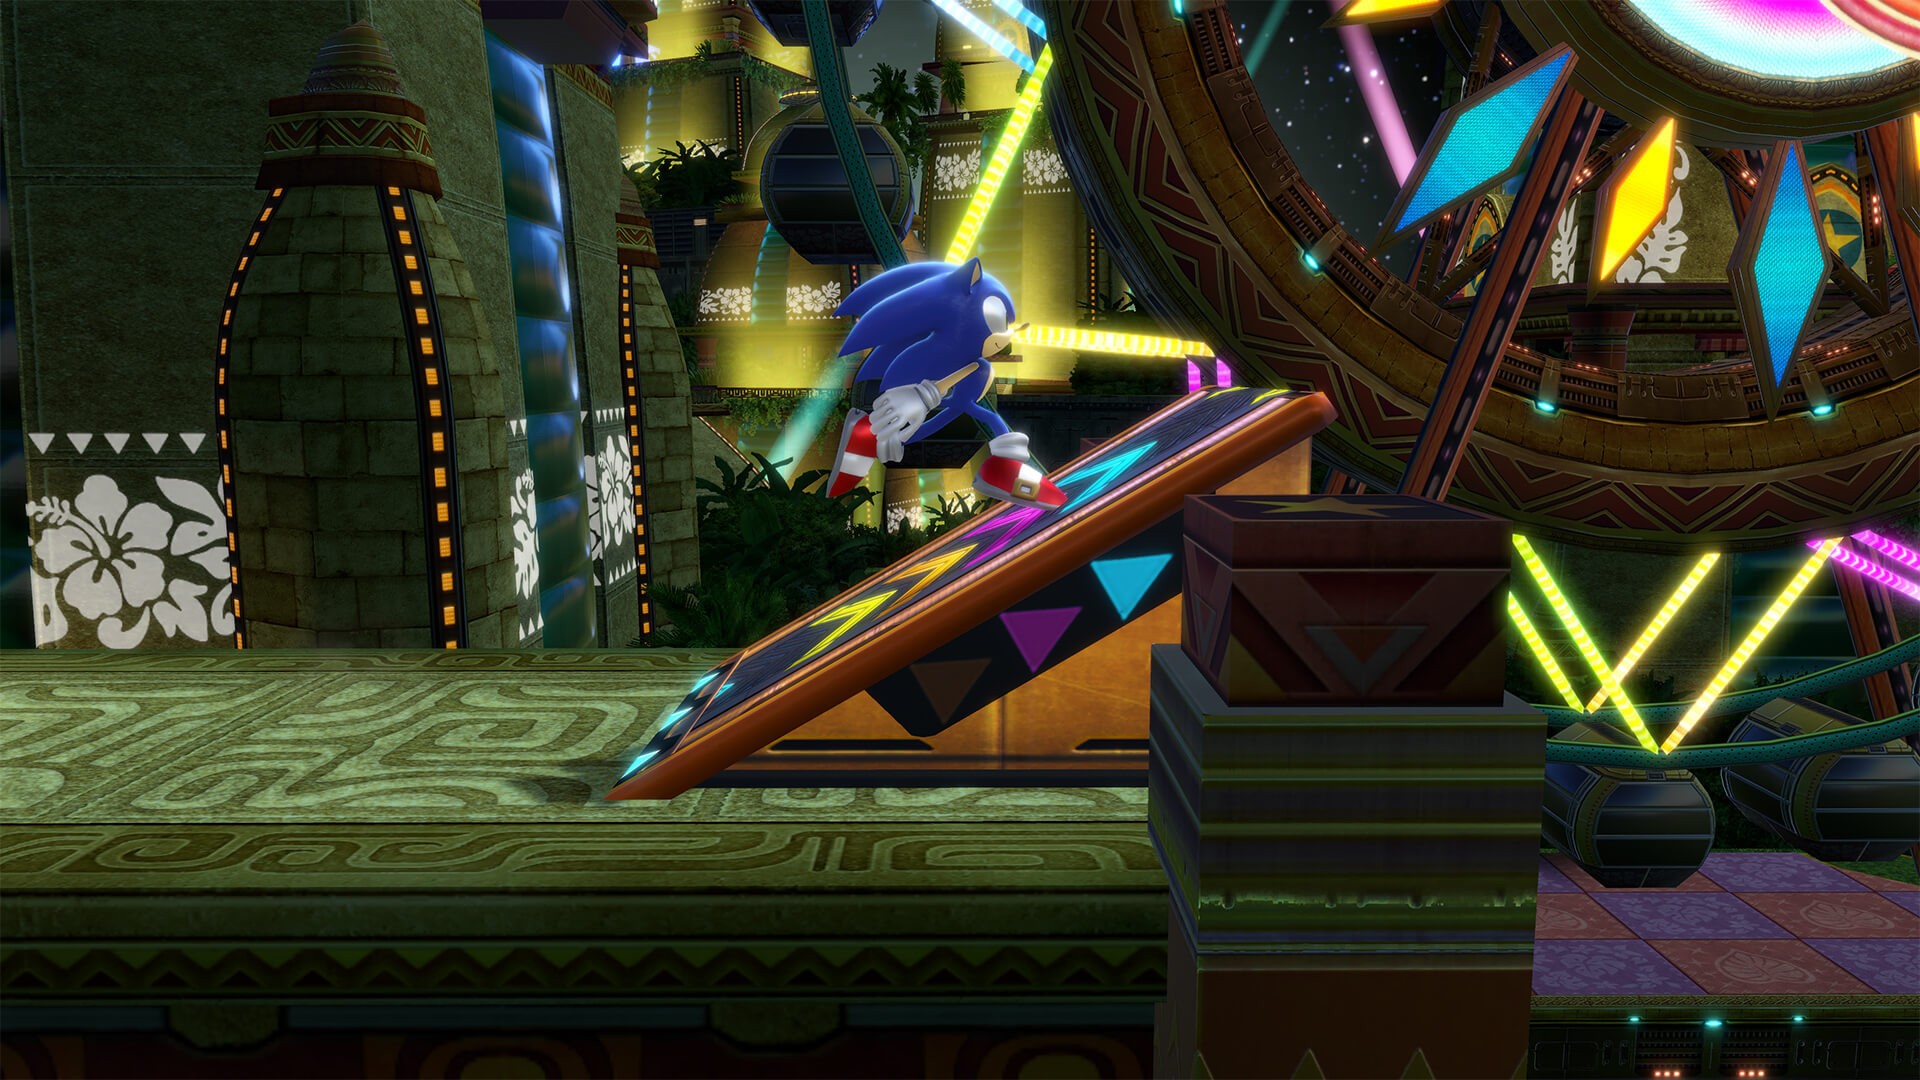 Sonic Colors: Ultimate, PC Steam Game